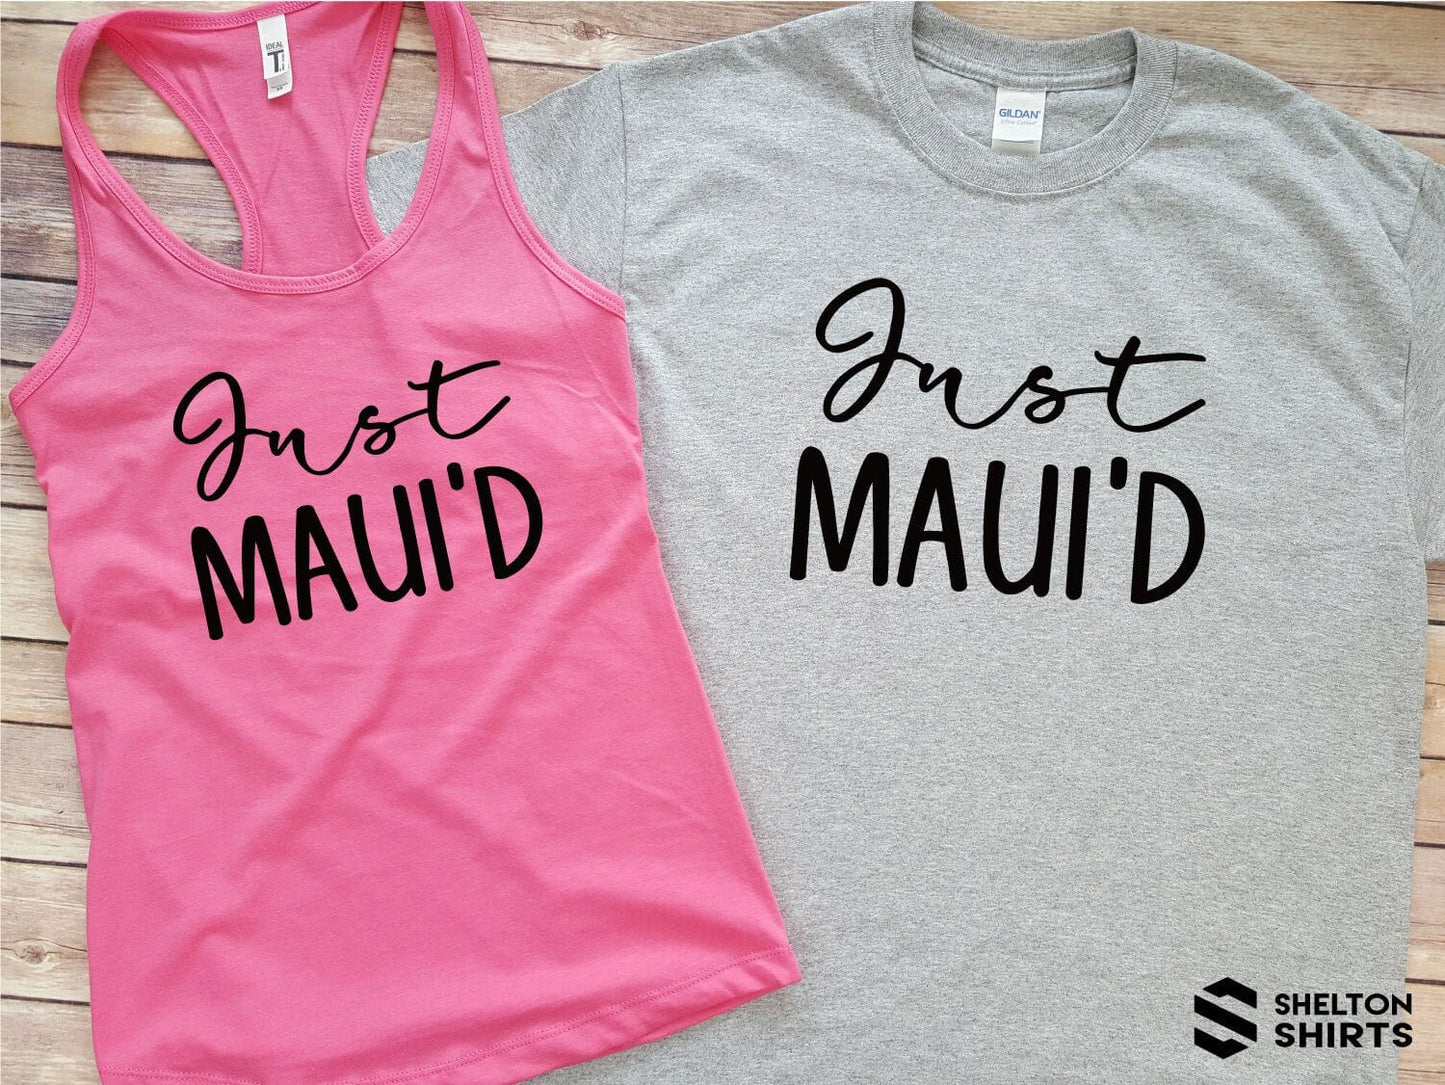 Just Maui'd Honeymoon Tank Top and Hubby T-Shirt - Set of 2 shirts Candy Wrapper Store